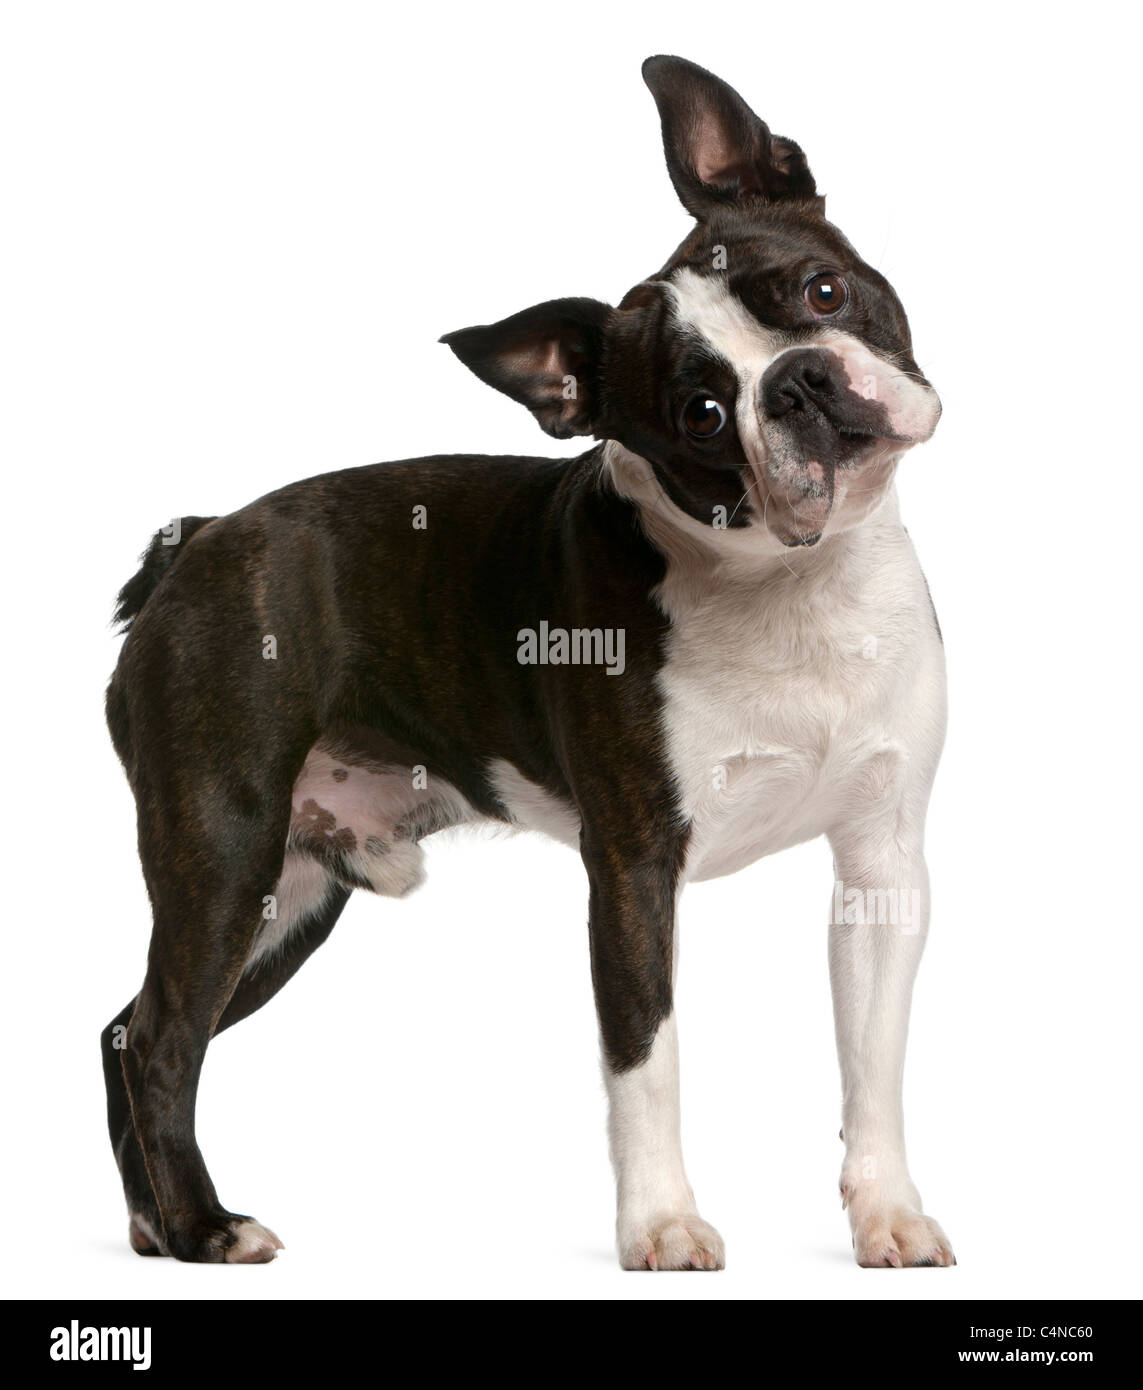 Boston Terrier, 1 year old, standing in front of white background Stock Photo